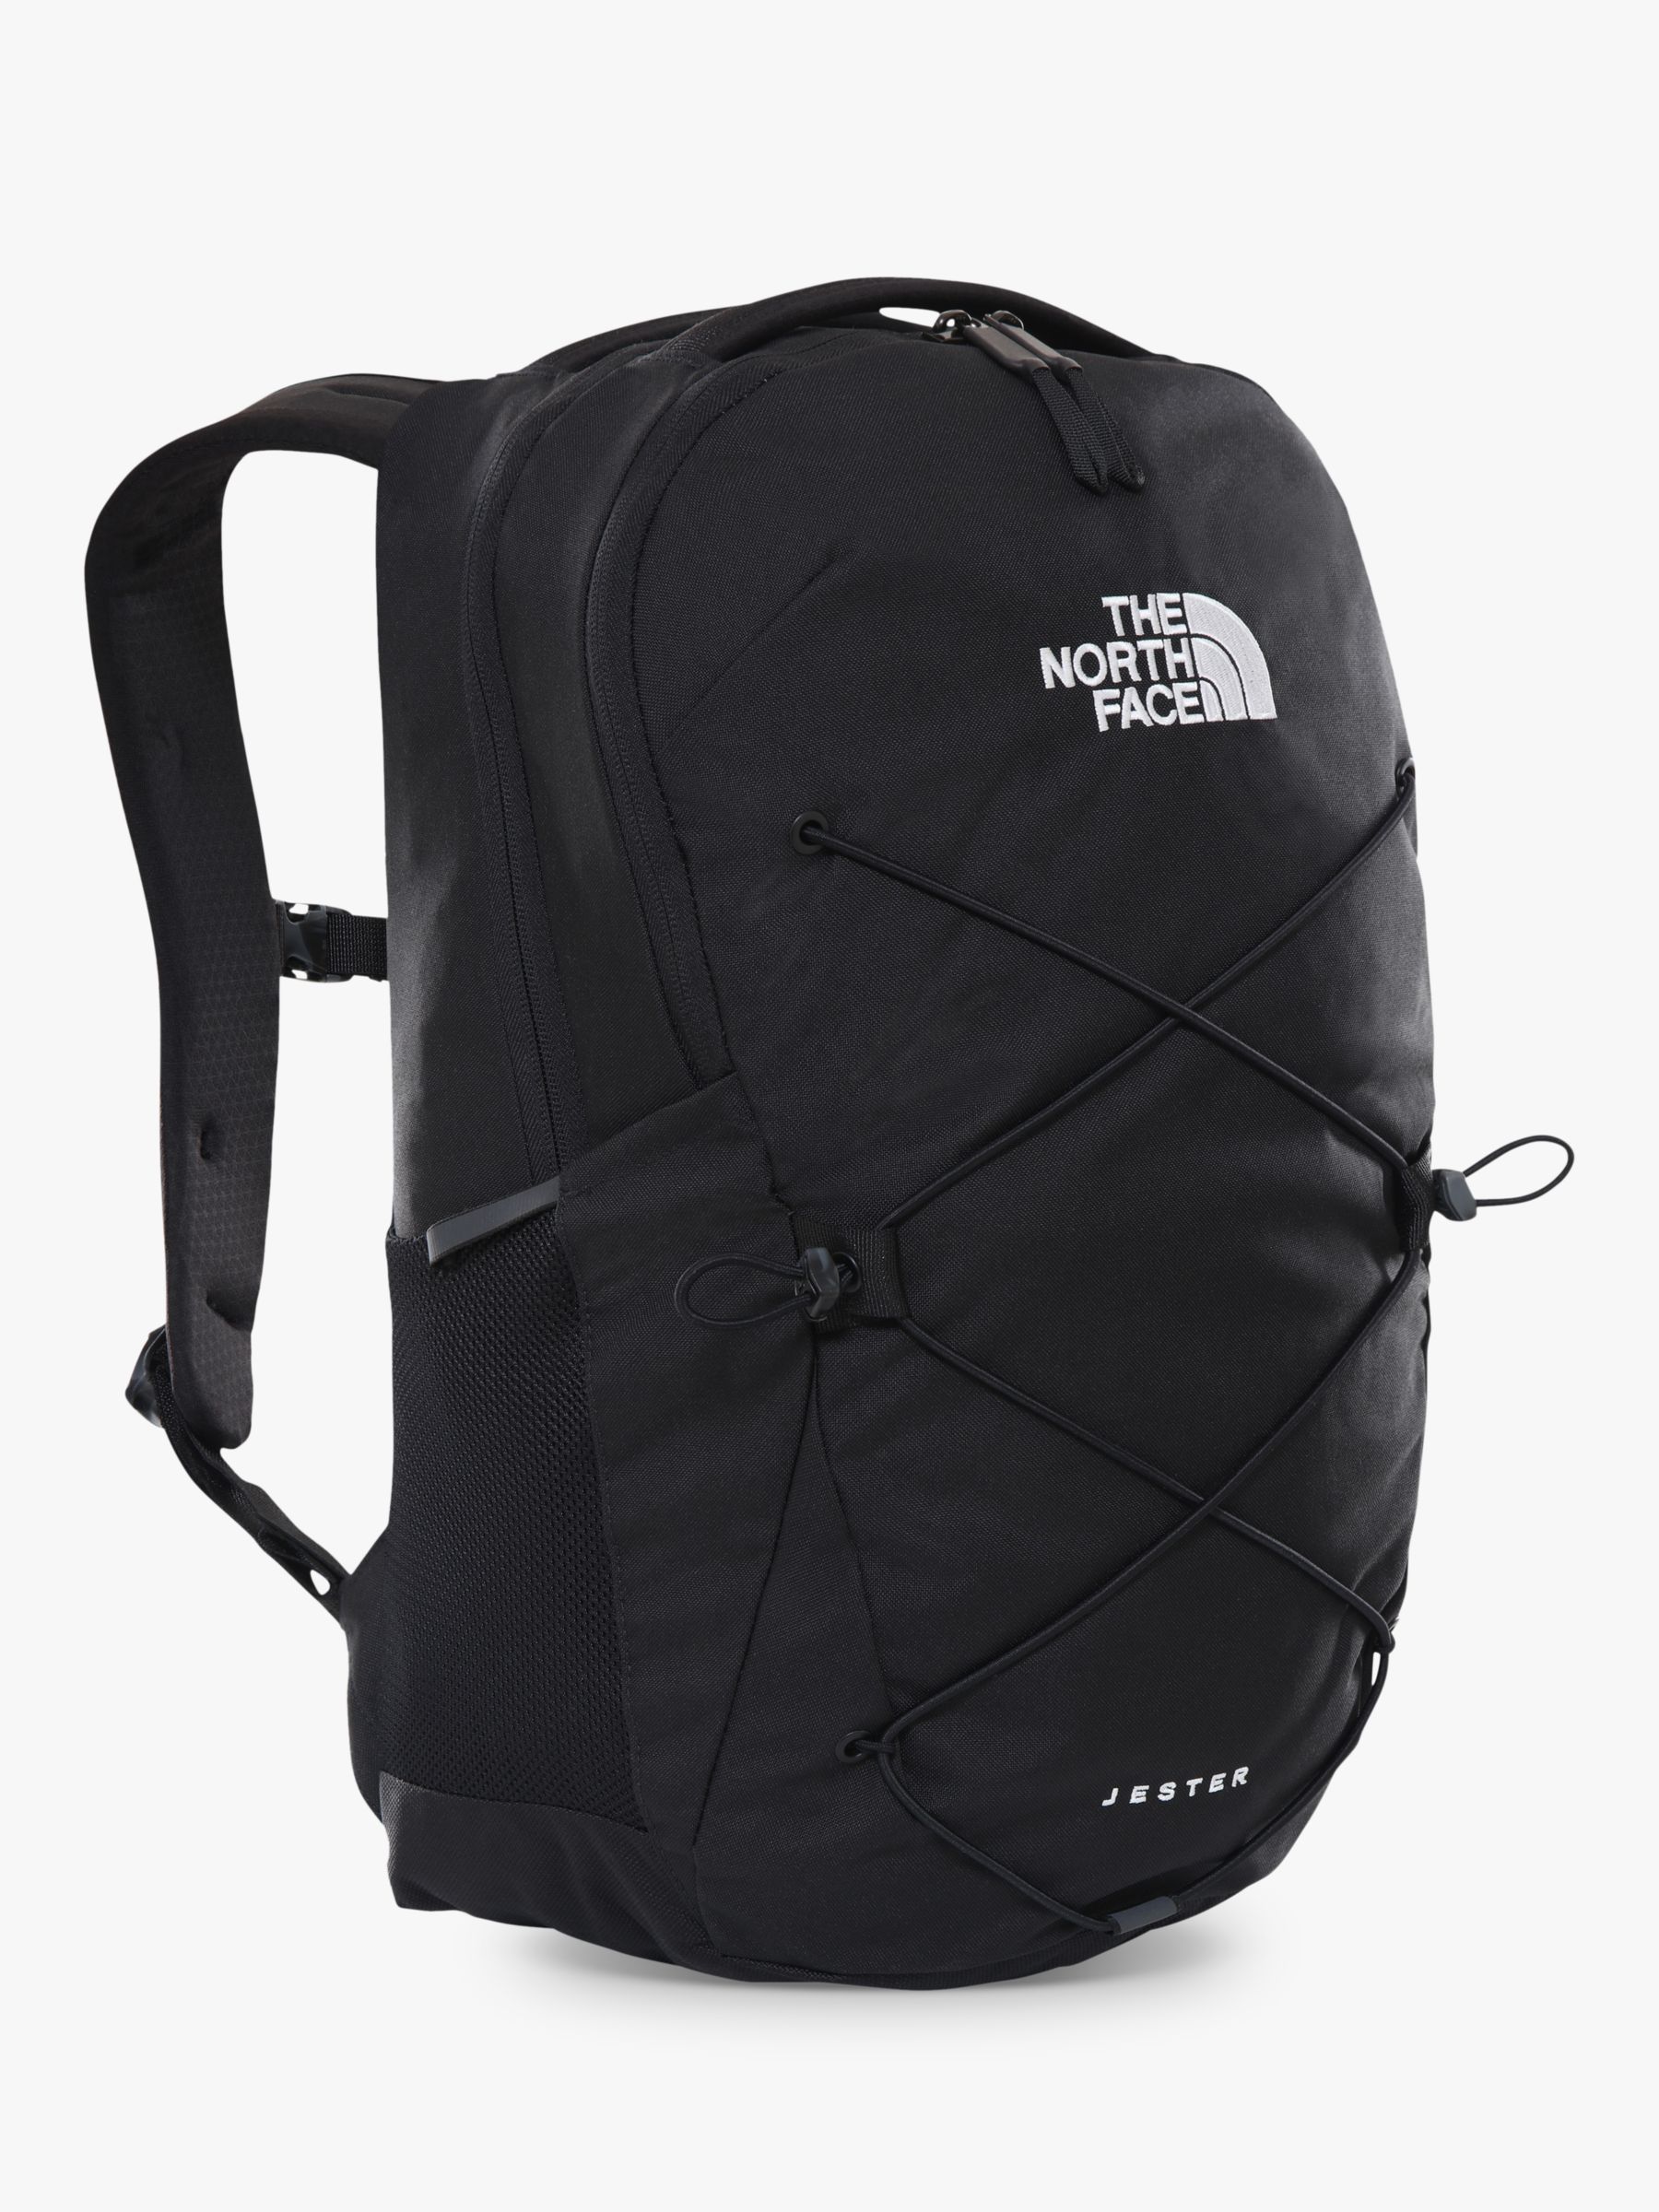 north face backpack black and teal